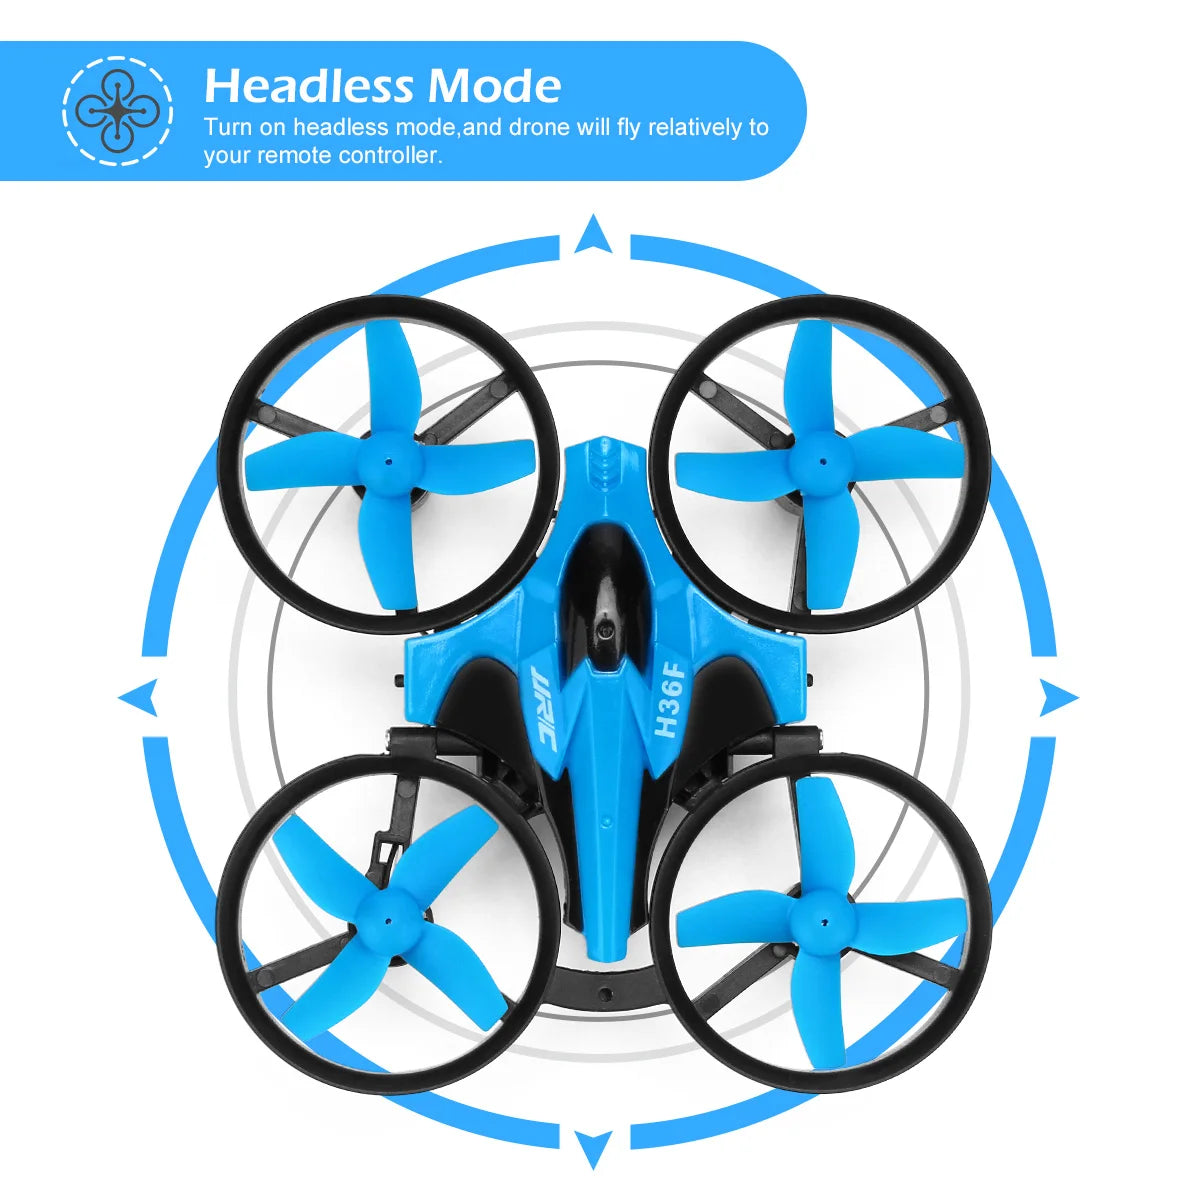 JJRC H36F RC Mini Drone, drone will fly relatively to your remote controller 1 0 .